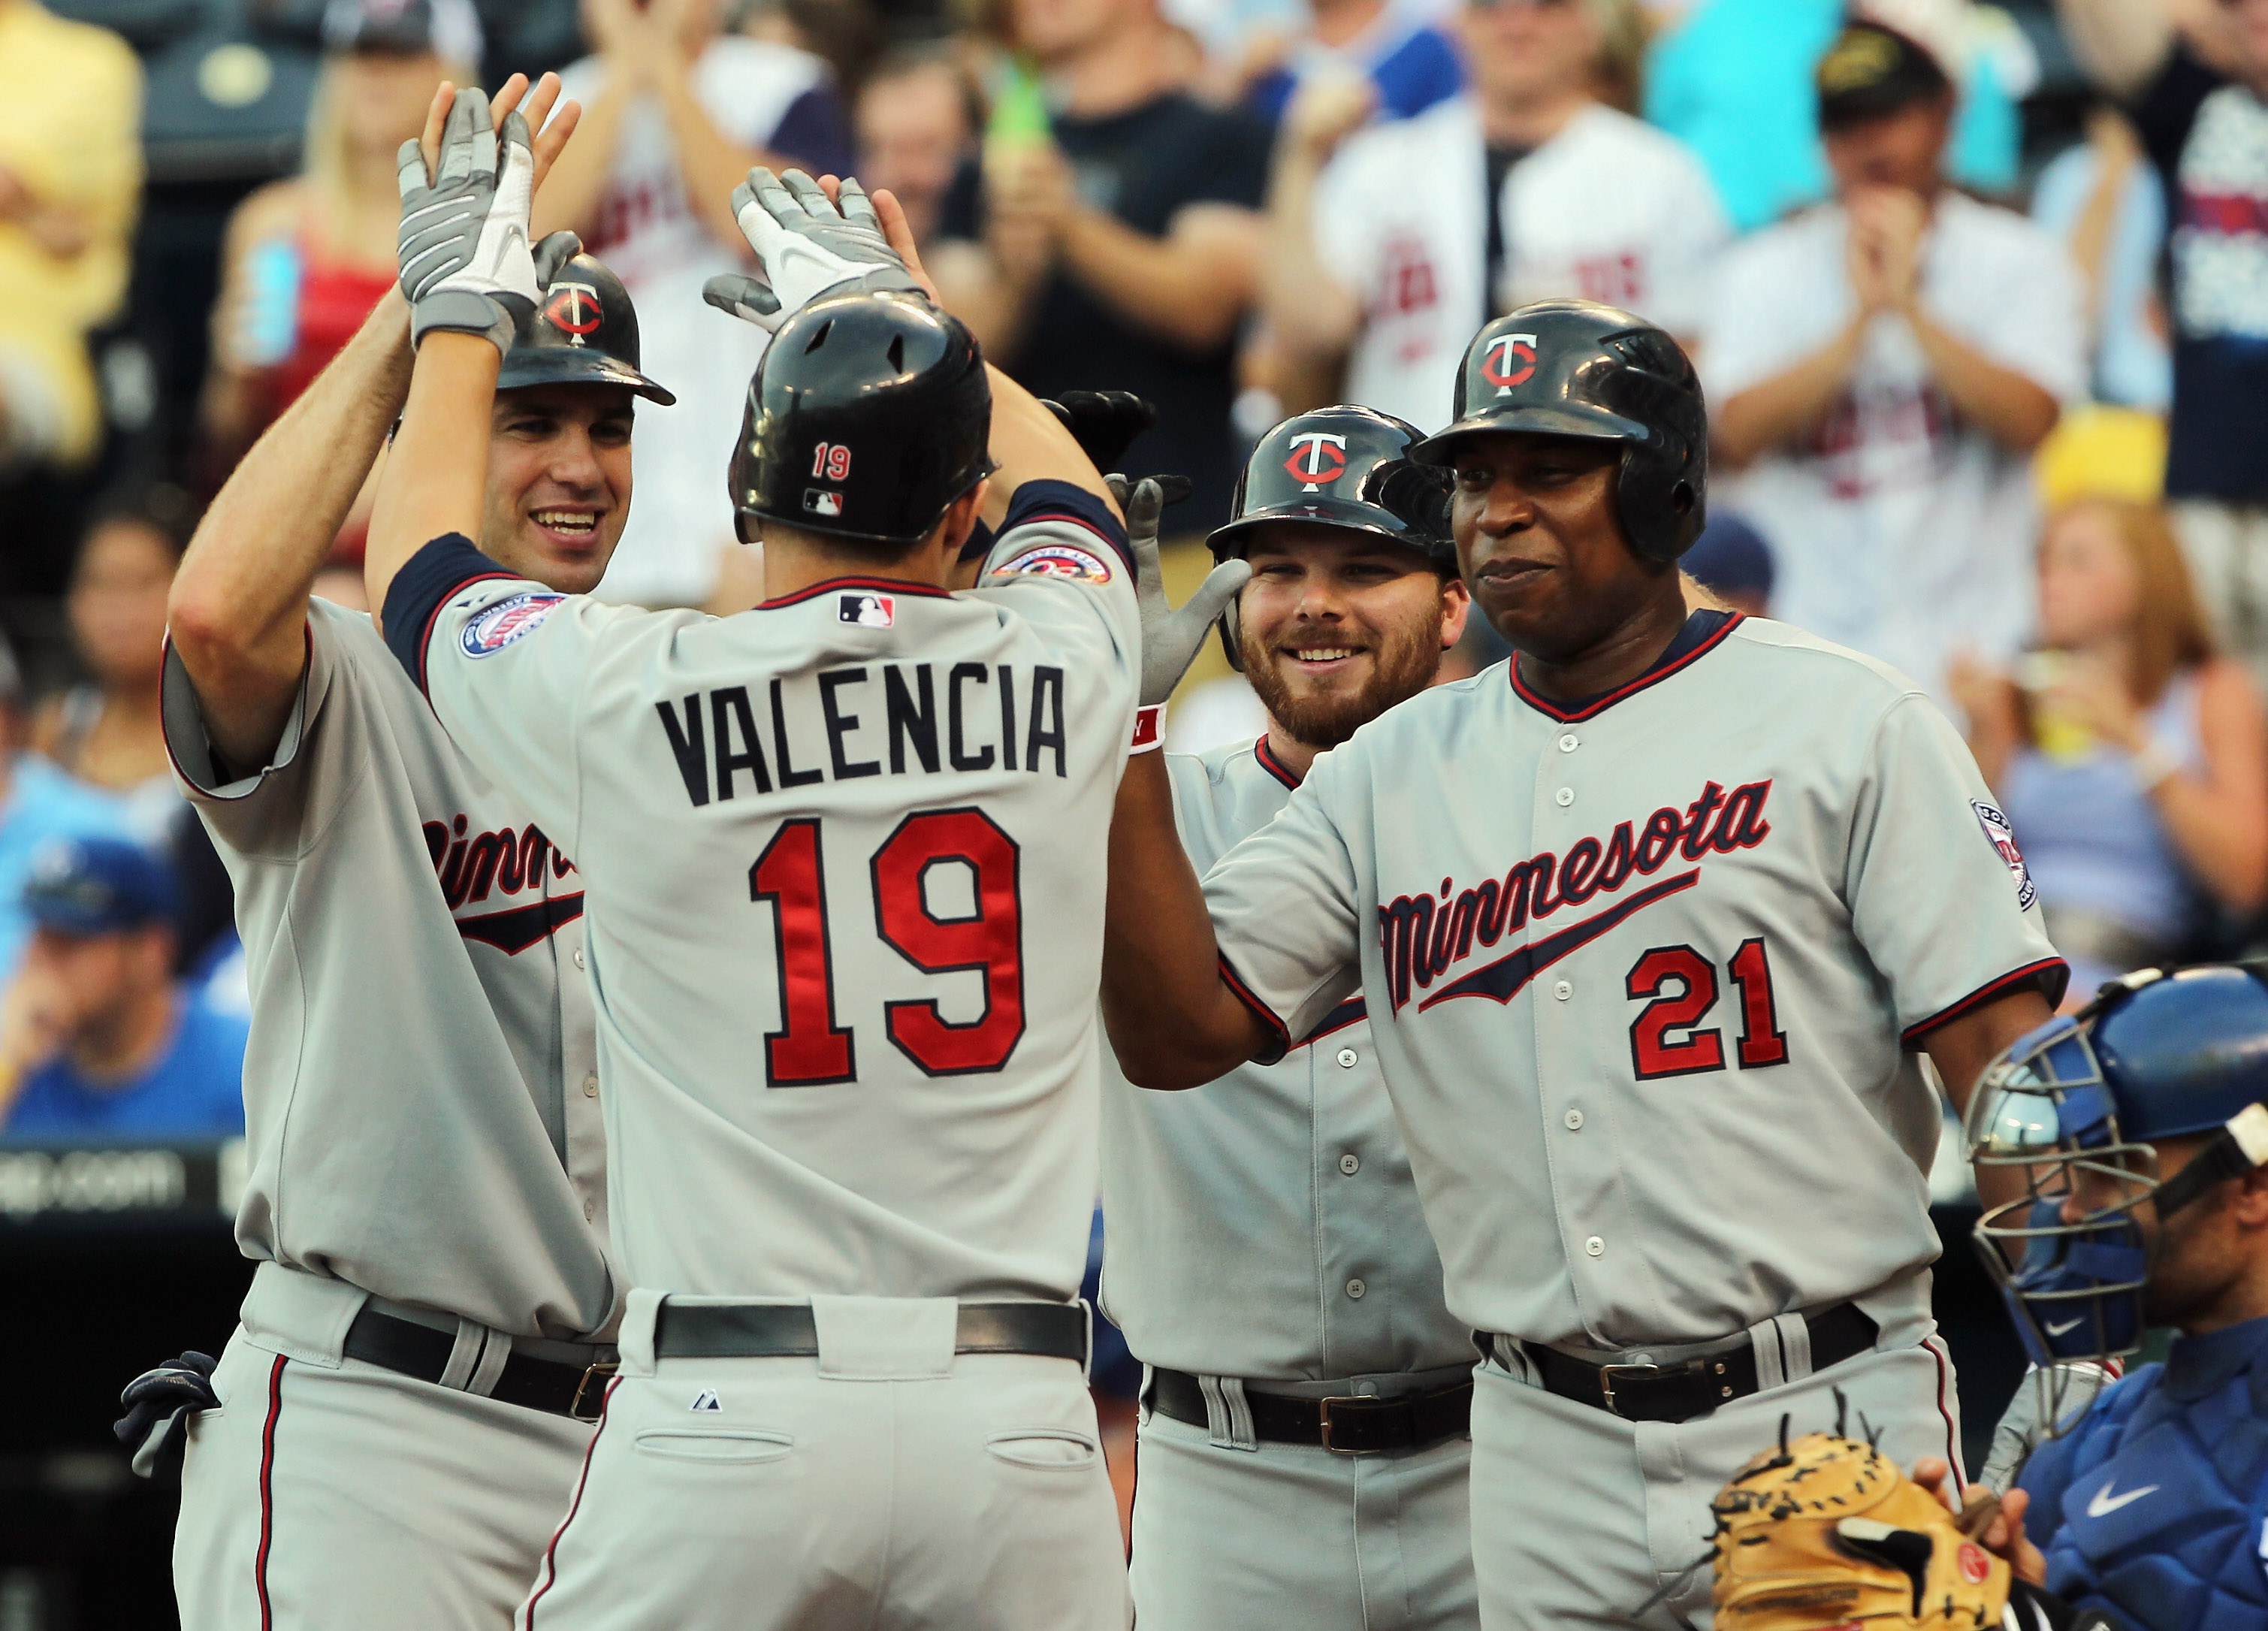 KANSAS CITY, MO - JULY 26:  Danny Valencia #19 of the Minnesota Twins is congratulated by teammates Joe Mauer #7, Jason Kubel #16 and Delmon Young #21 at home plate after hitting a grand slam home run during the 1st inning of the game against the Kansas C